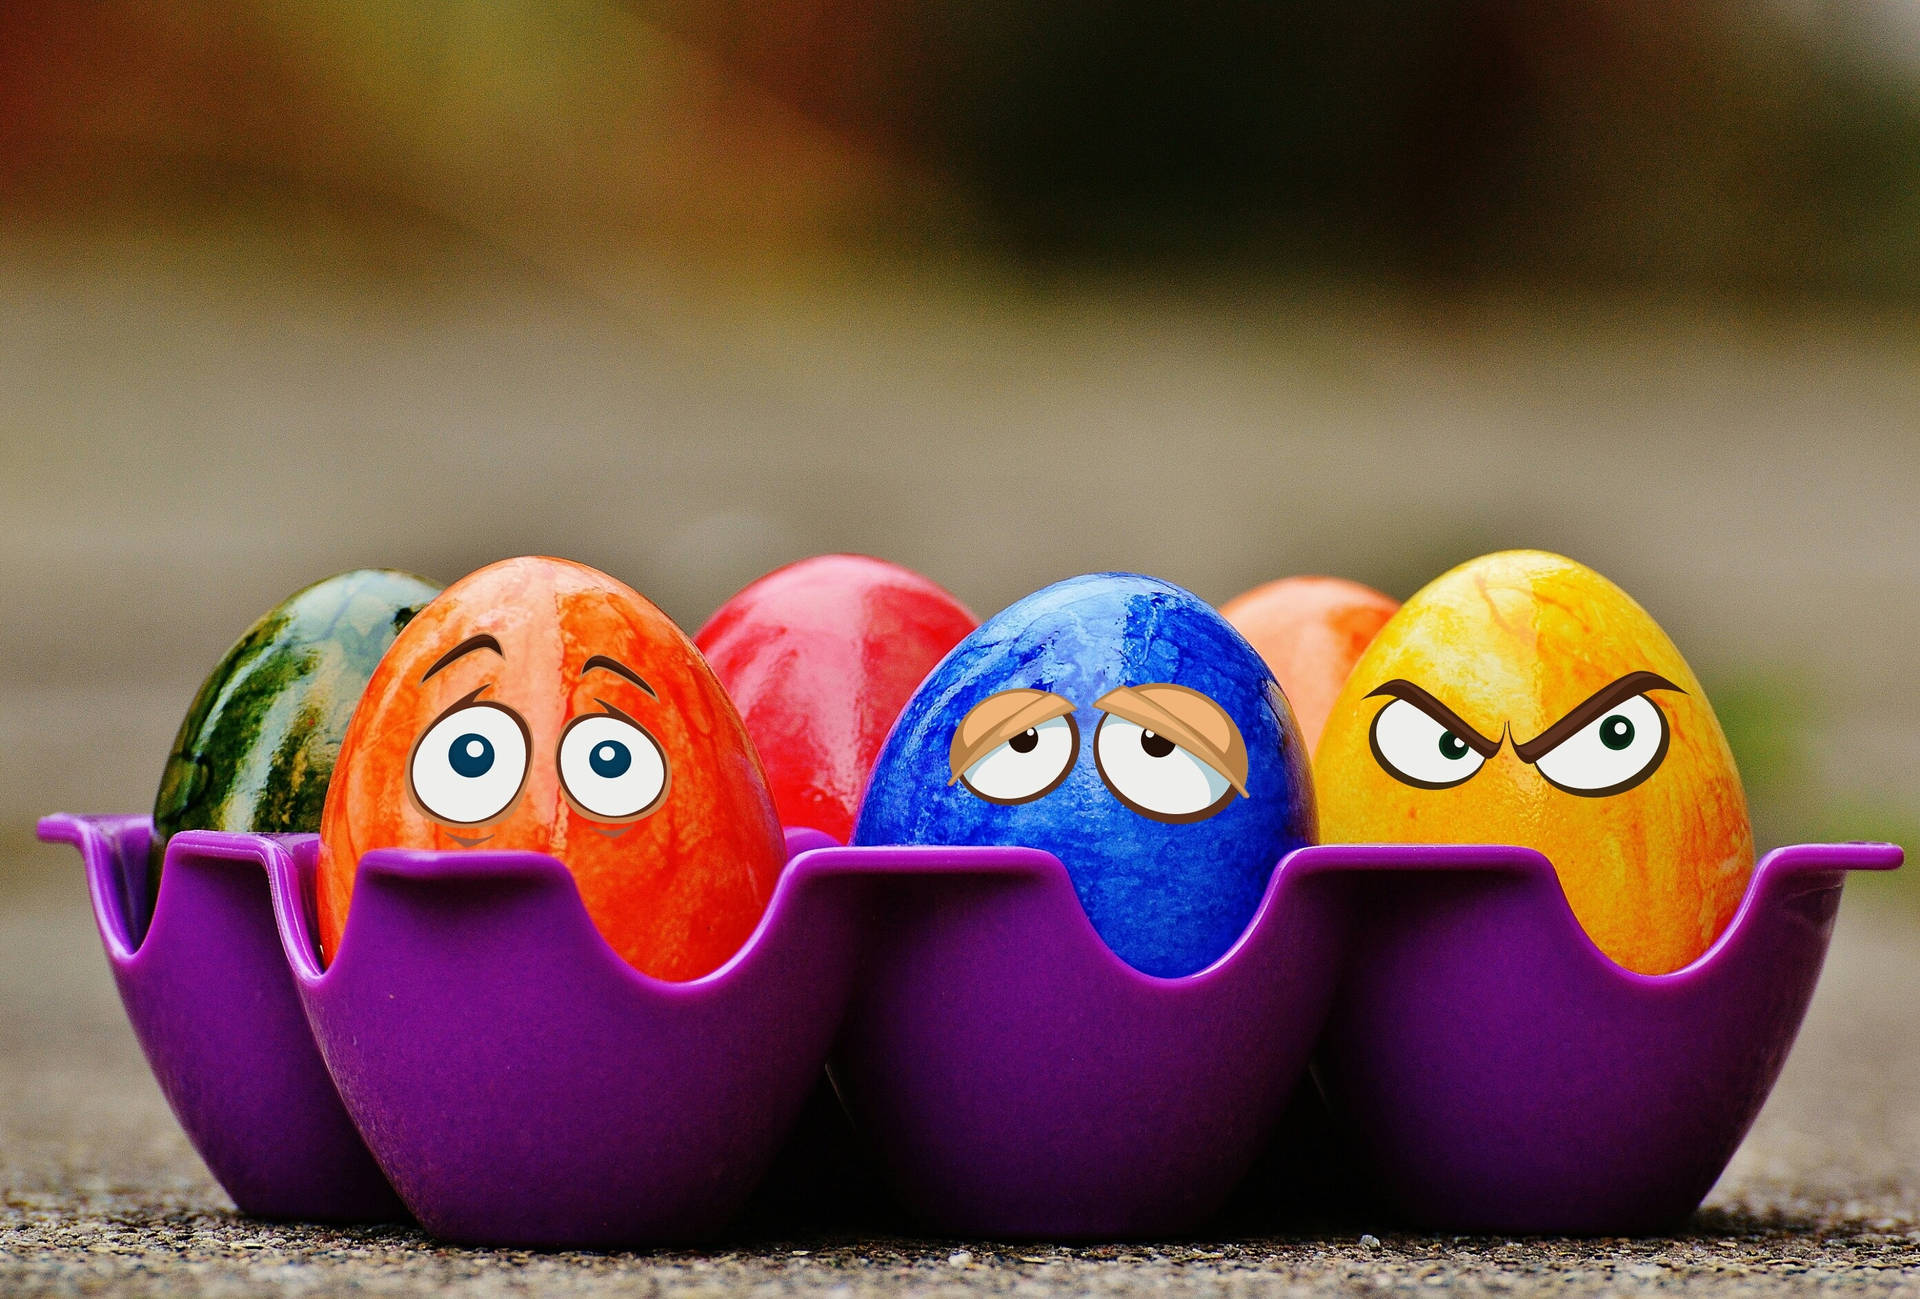 "Celebrate Easter with Fun and Colorful Emoji Eggs!" Wallpaper